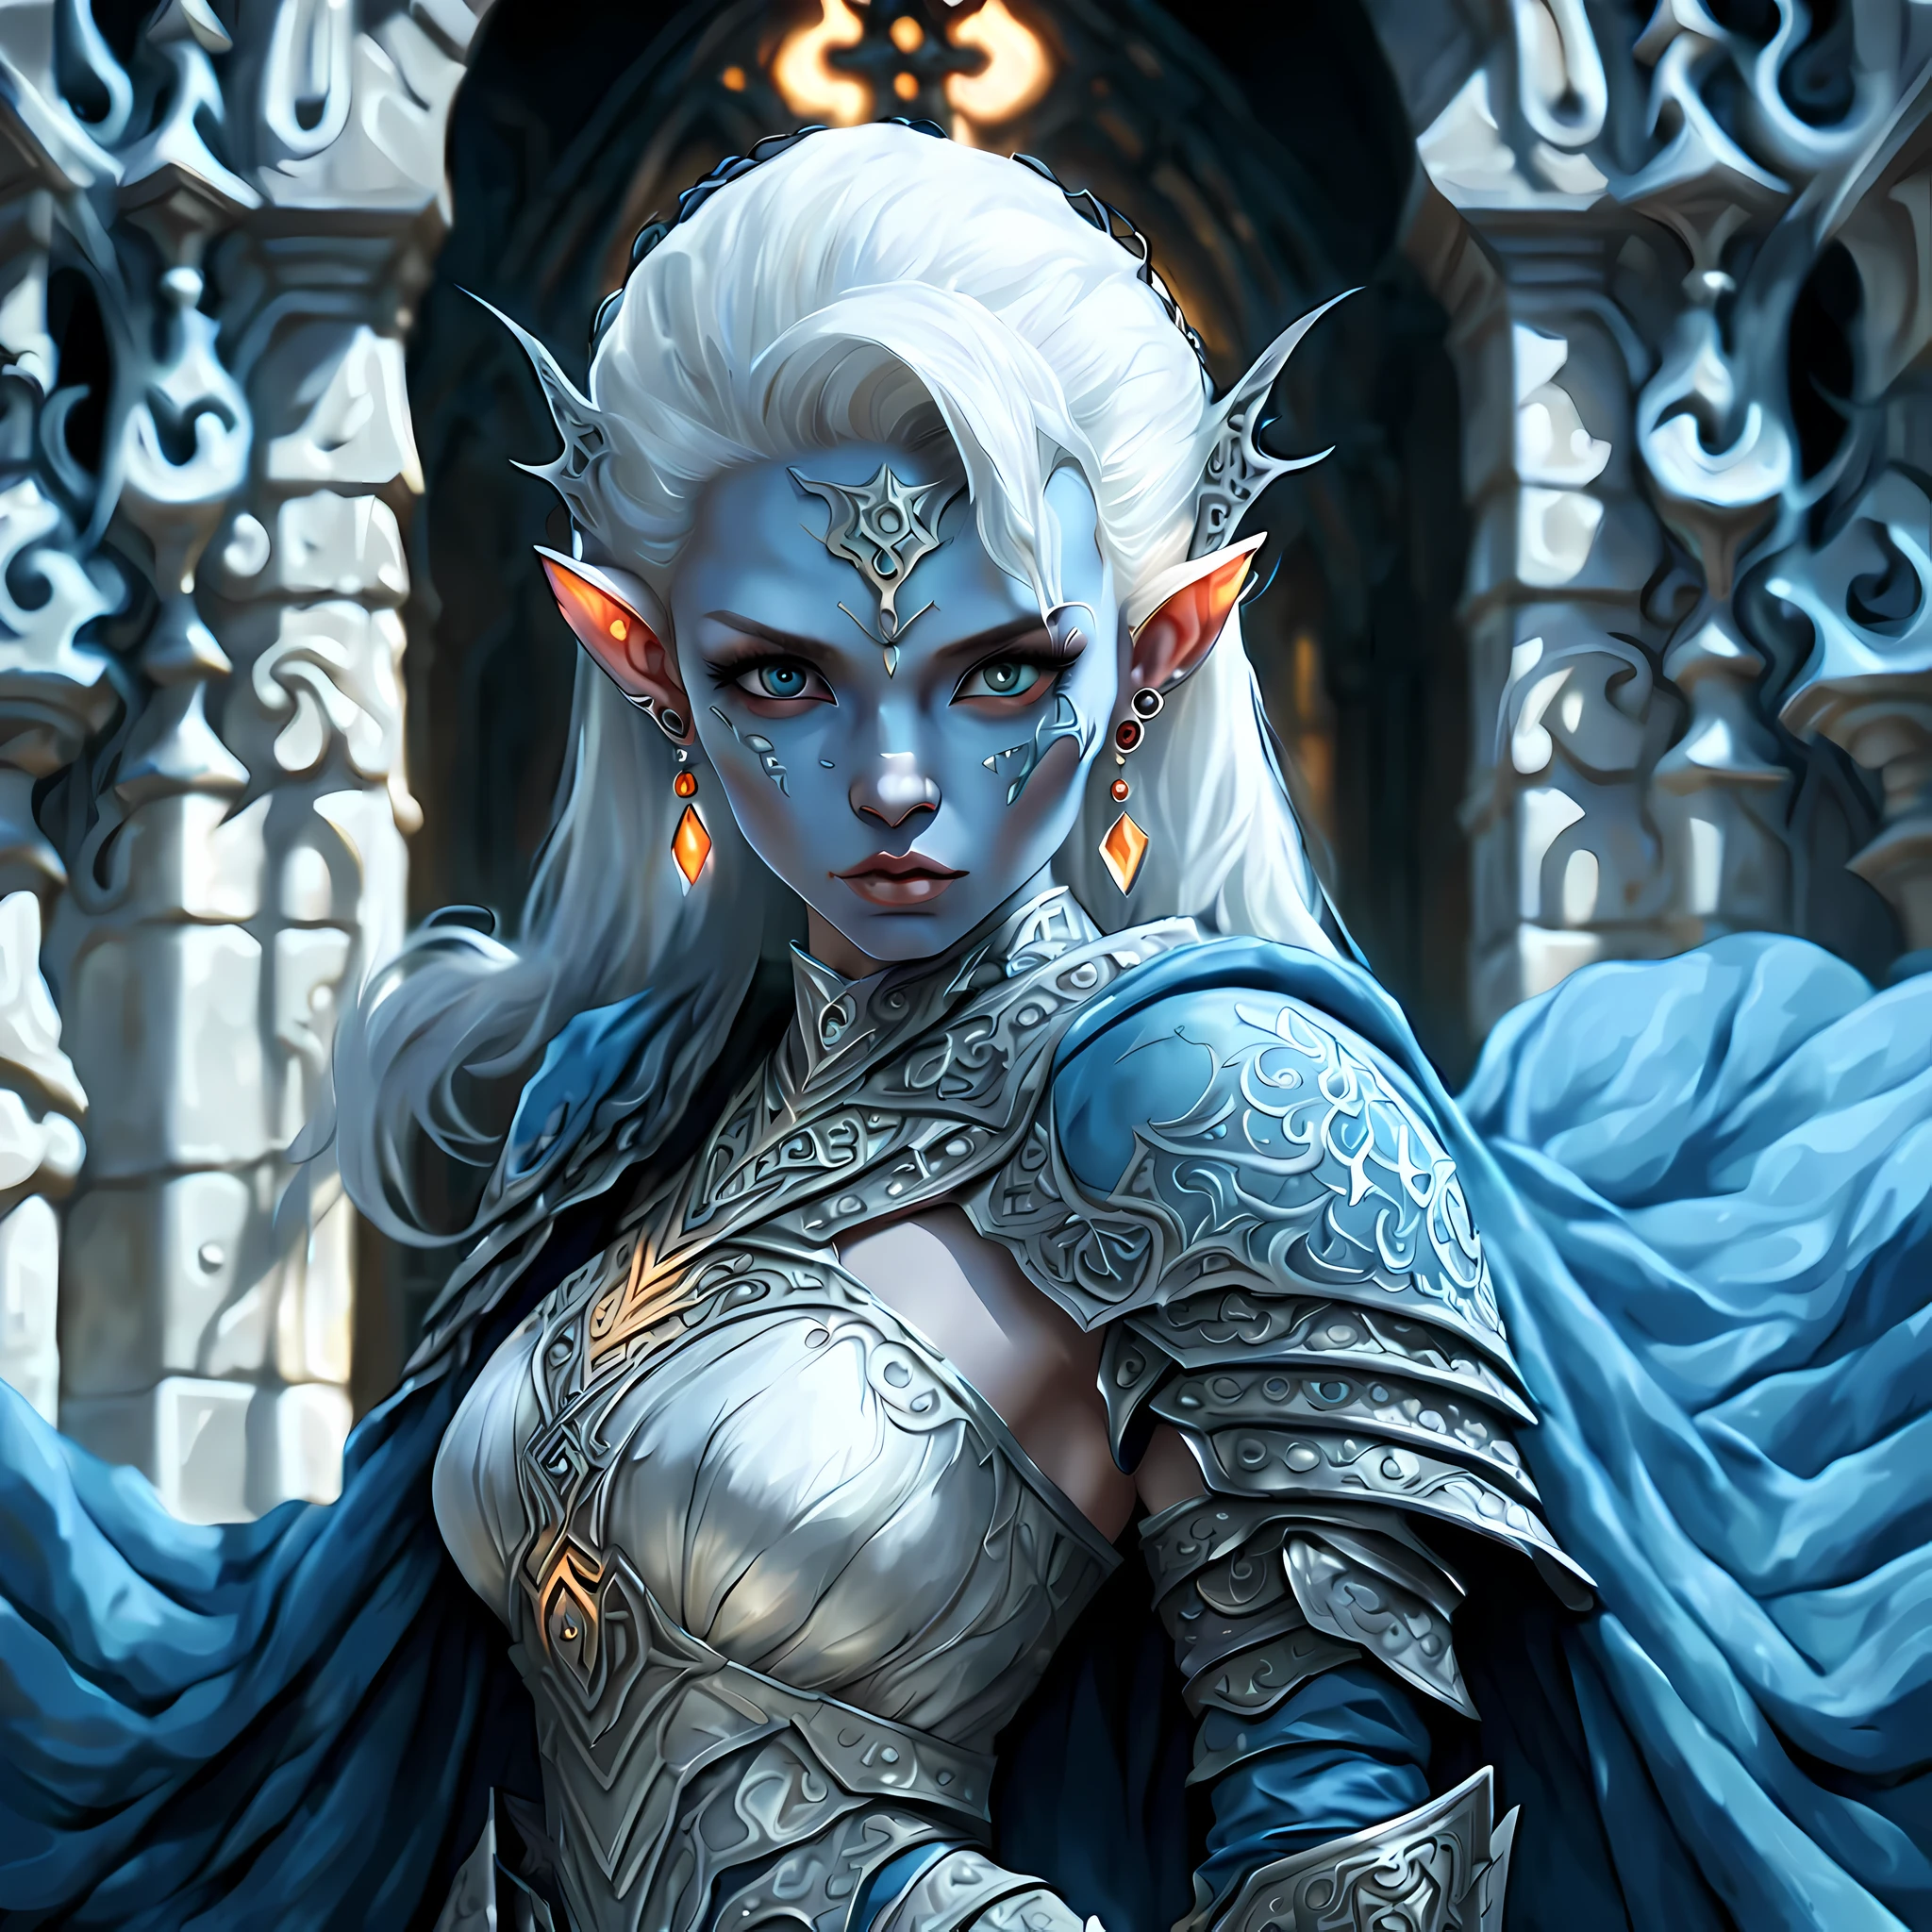 fantasy art, dnd art, RPG art, wide shot, (masterpiece: 1.4) a (portrait: 1.3) intense details, highly detailed, photorealistic, best quality, highres, portrait a female (fantasy art, Masterpiece, best quality: 1.3) ((blue skin: 1.5)), intense details facial details, exquisite beauty, (fantasy art, Masterpiece, best quality) cleric, (blue: 1.3) skinned female, (white hair: 1.3), bald head (green: 1.3) eye, fantasy art, Masterpiece, best quality) armed a fiery sword red fire, wearing heavy (white: 1.3) half plate mail armor, wearing high heeled laced boots, wearing an(orange :1.3) cloak, wearing glowing holy symbol GlowingRunes_yellow, within fantasy temple background, action shot reflection light, high details, best quality, 16k, [ultra detailed], masterpiece, best quality, (extremely detailed), close up, ultra wide shot, photorealistic, RAW, fantasy art, dnd art, fantasy art, realistic art,((best quality)), ((masterpiece)), (detailed), perfect face, ((no ears: 1.6))